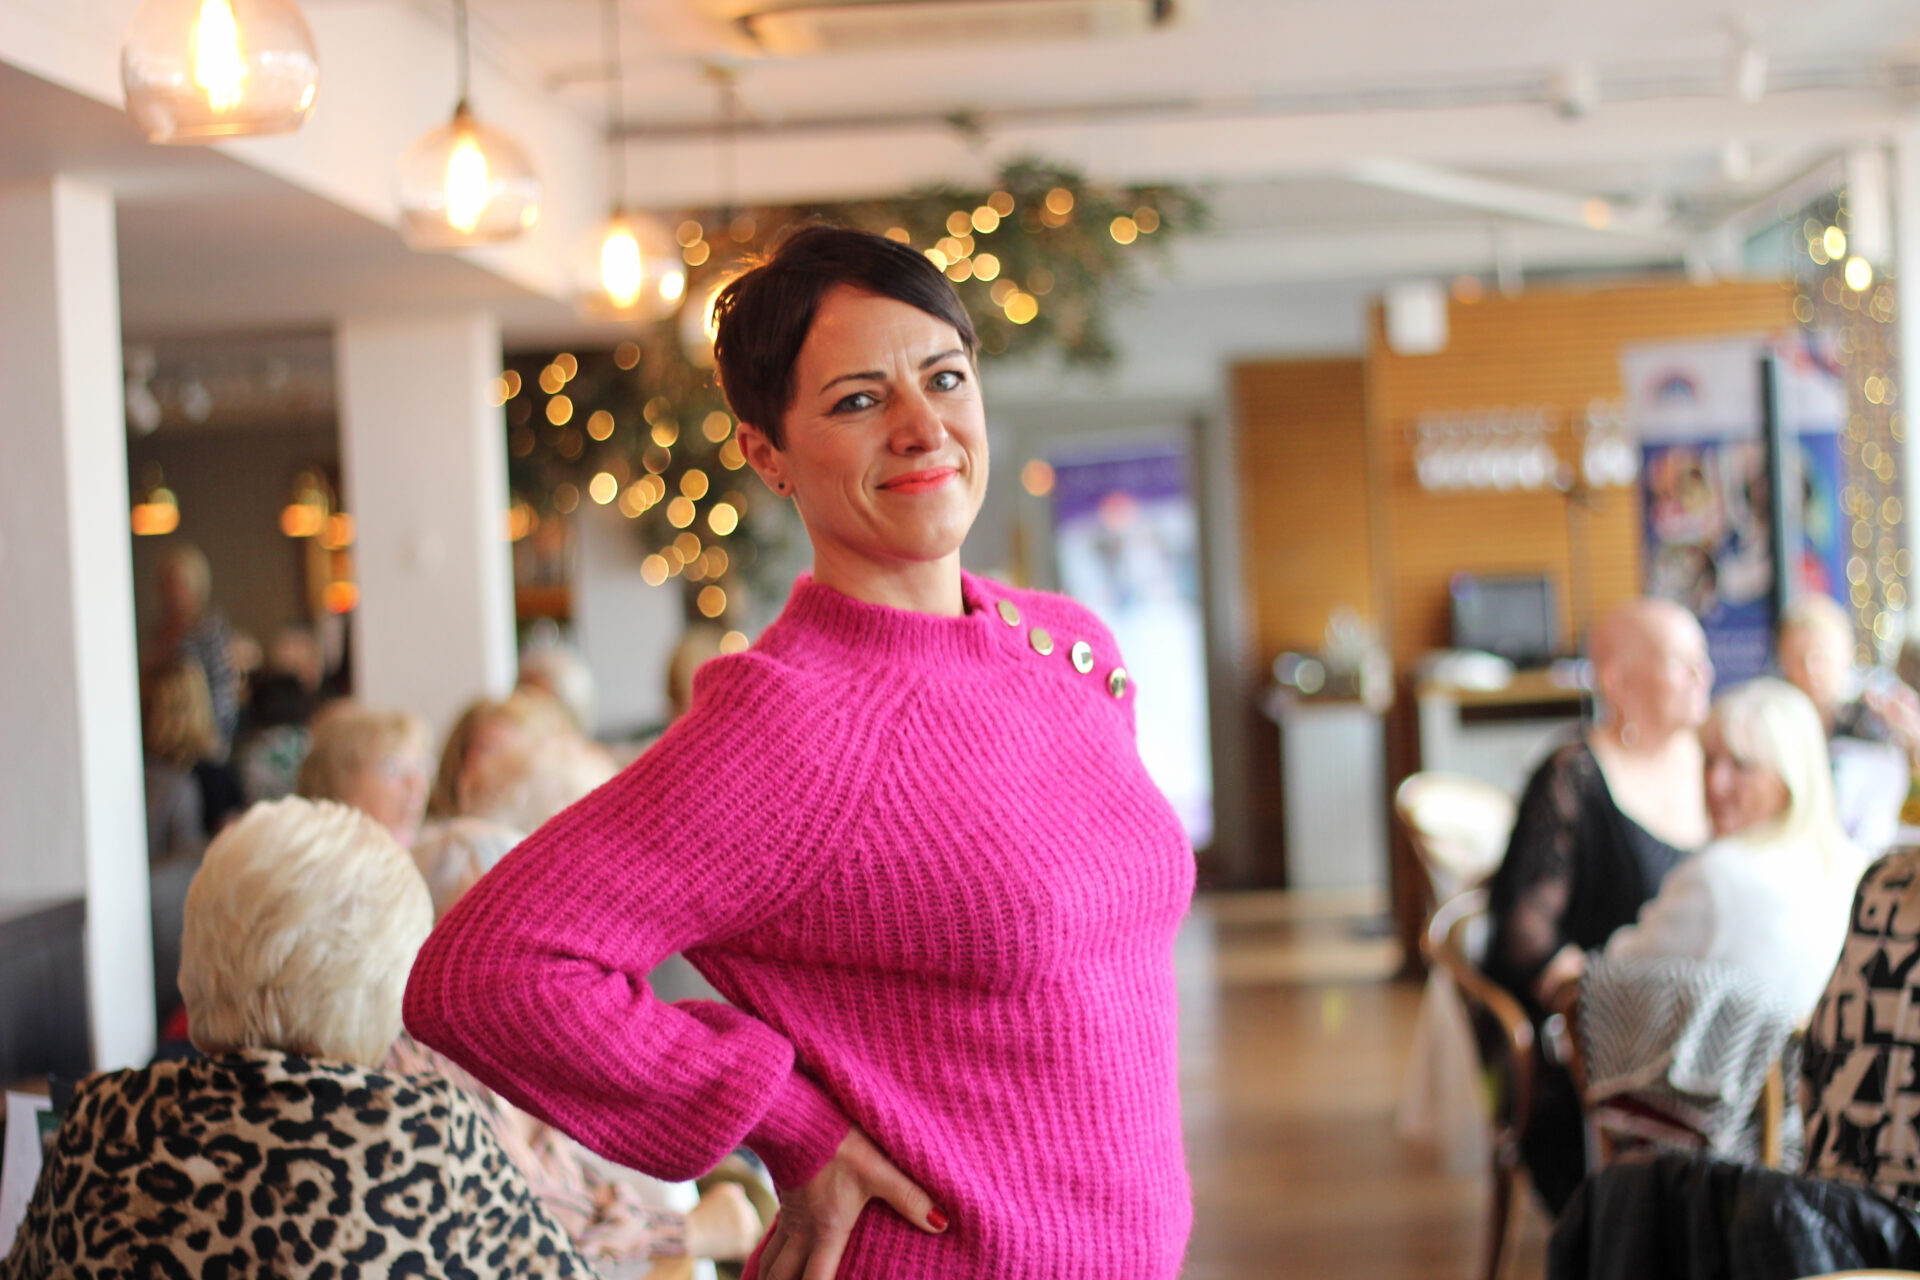 Woman wearing a bright pink jumper stood in a restaurant